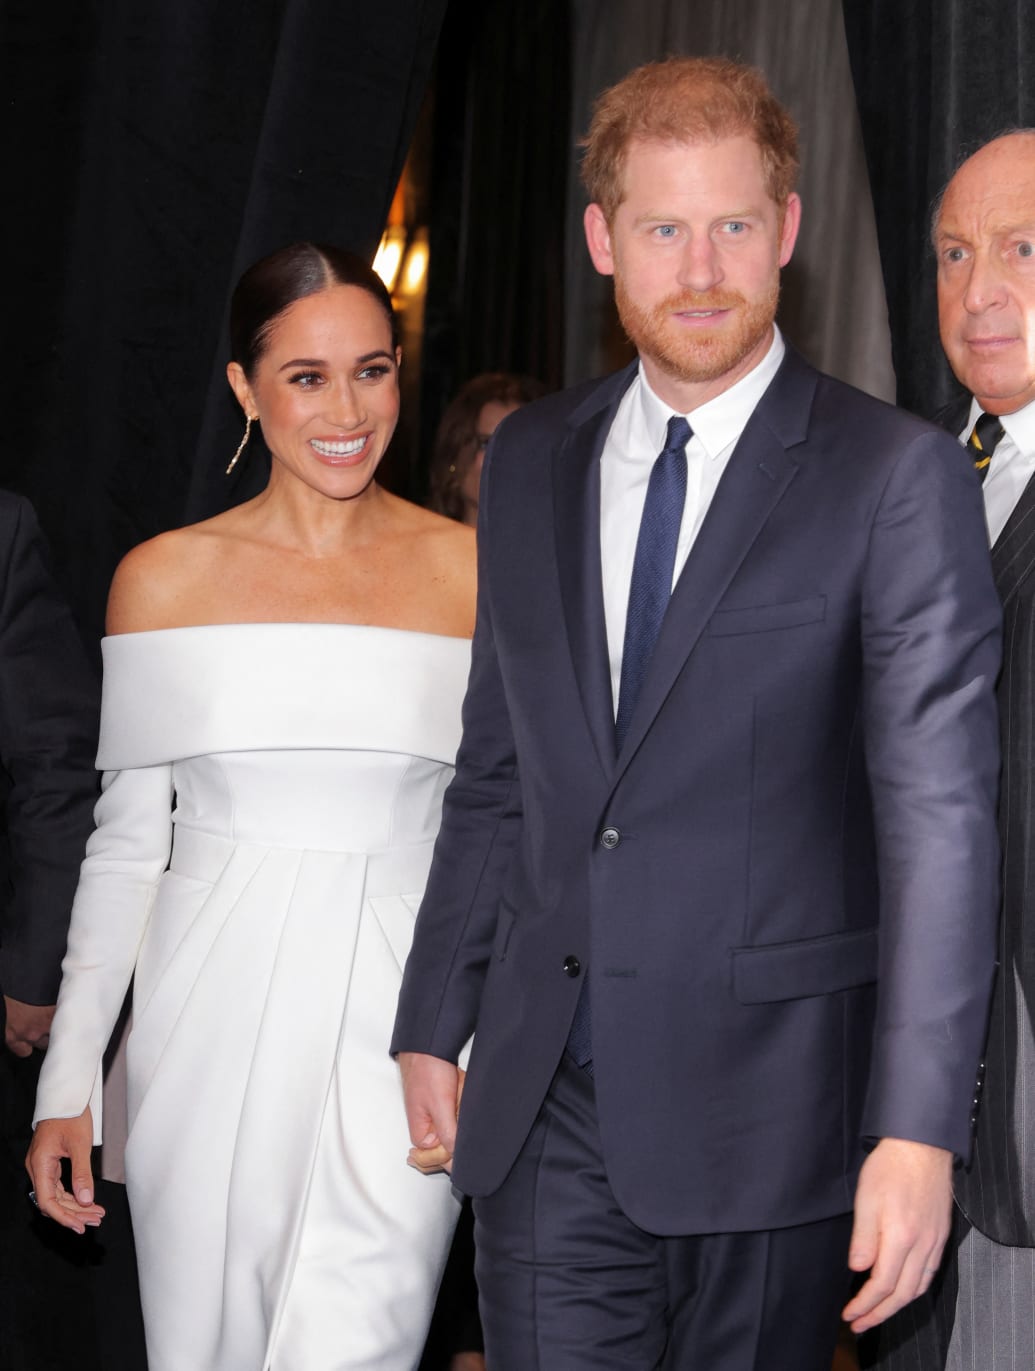 Britain's Prince Harry, Duke of Sussex, Meghan, Duchess of Sussex attend the 2022 Robert F. Kennedy Human Rights Ripple of Hope Award Gala in New York City, U.S., December 6, 2022.